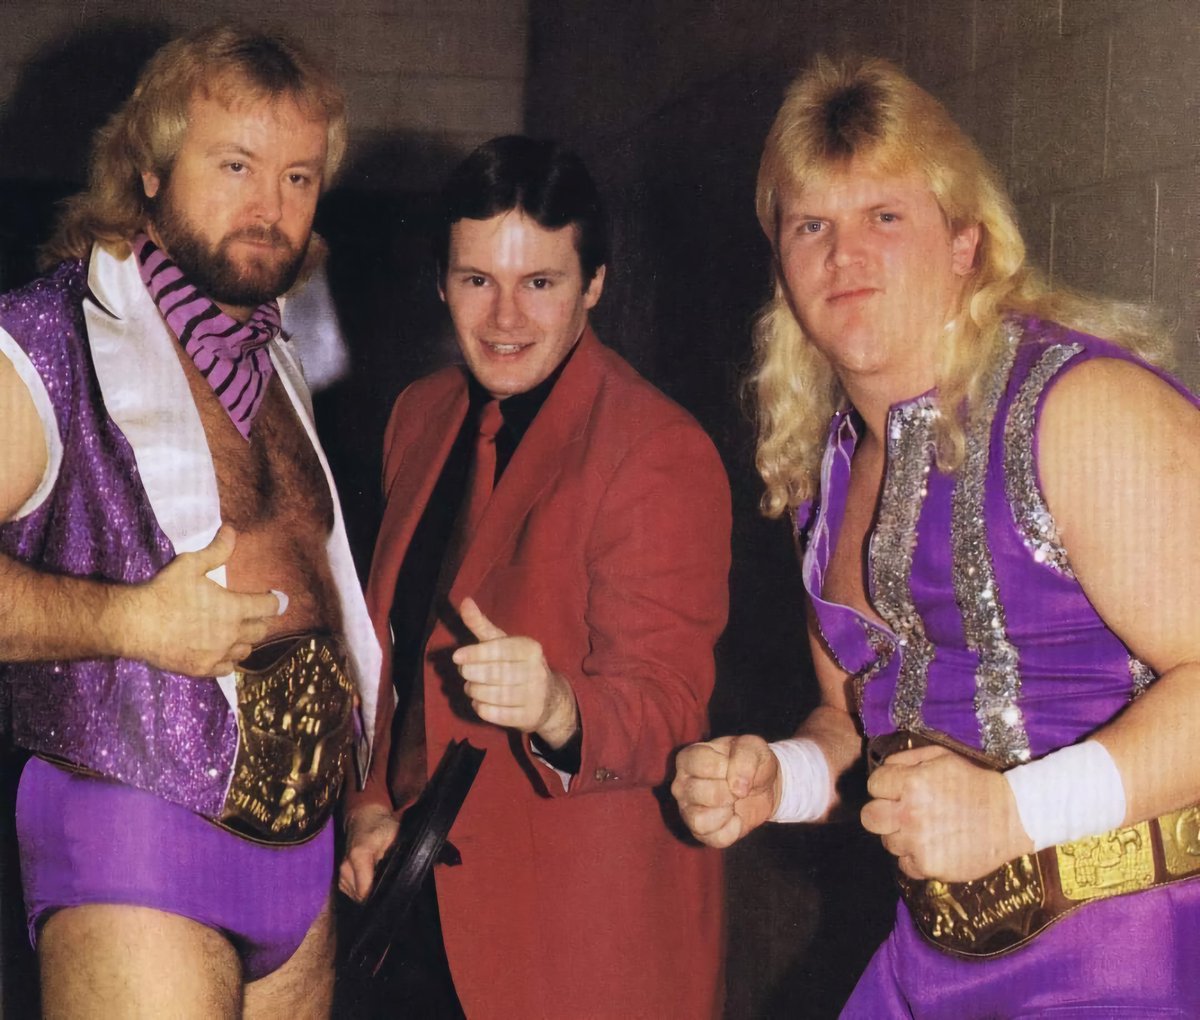 Forty years ago today on this date: The Midnight Express defeated The Rock and Roll Express in New Orleans, La.